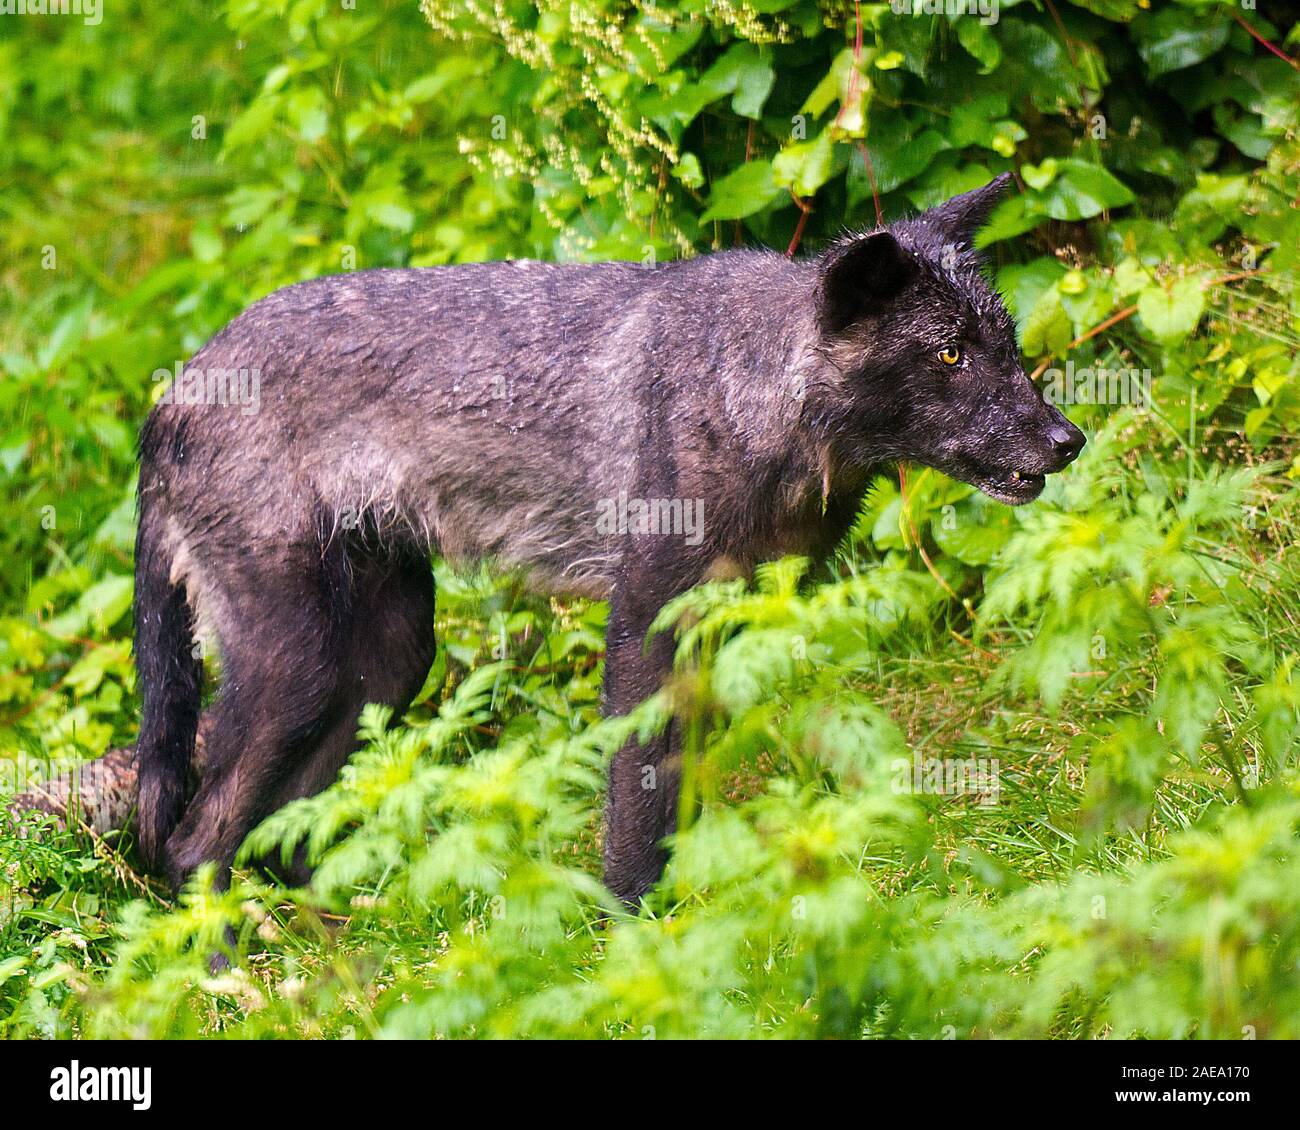 Wolf animal close-up profile view with a wet fur coat after a rainfall in the forest displaying black silver fur coat, head, eyes, ears, muzzle, paws, Stock Photo